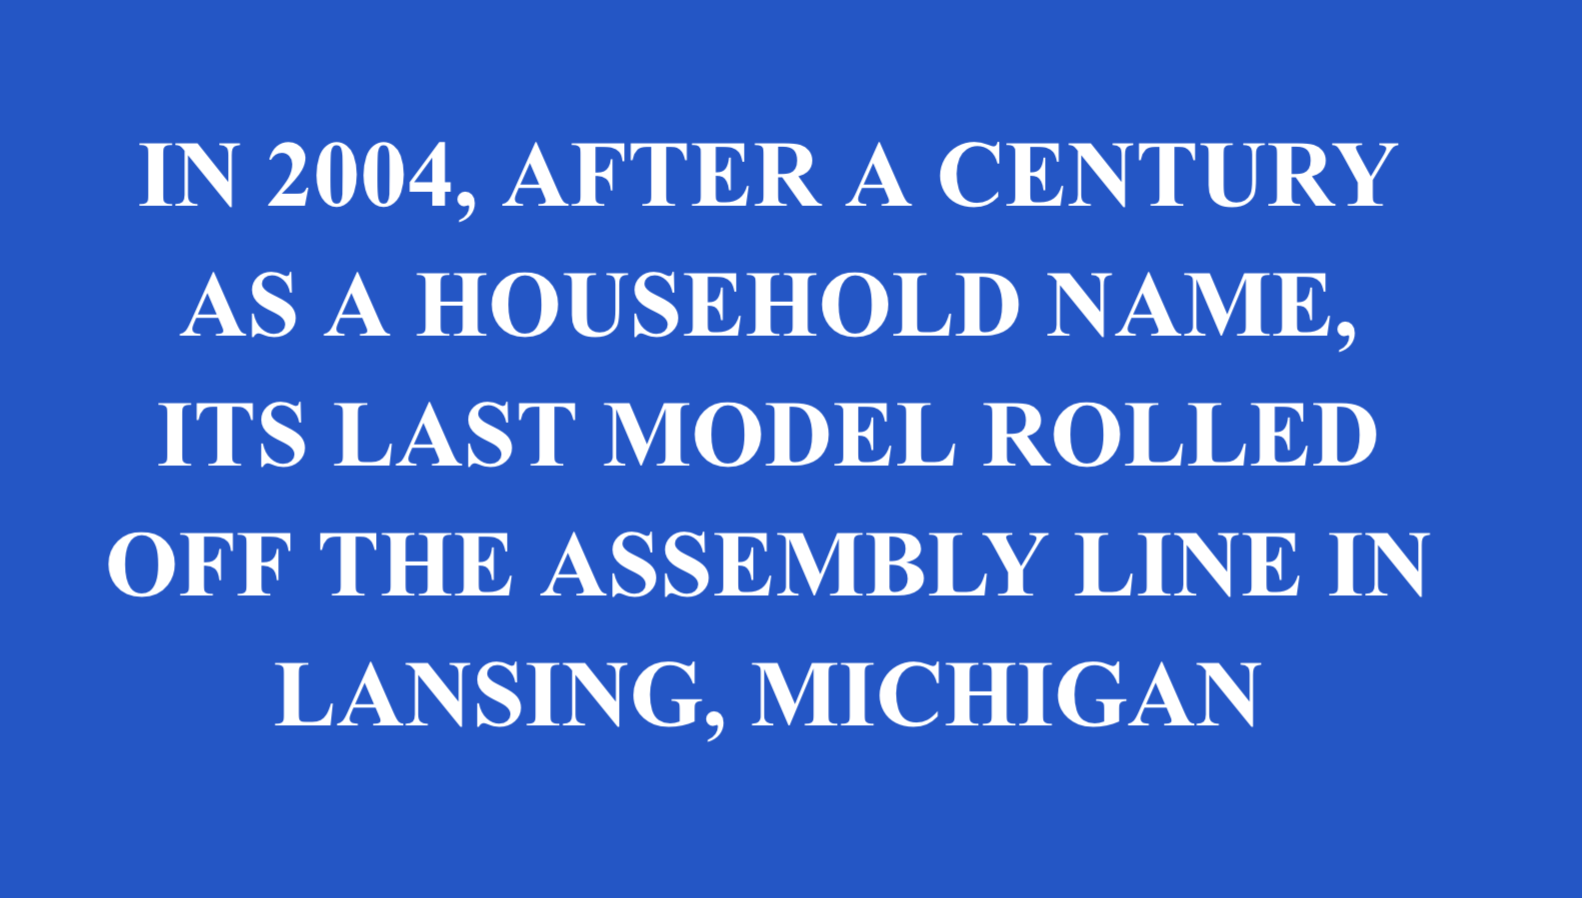 Jeopardy-style trivia question